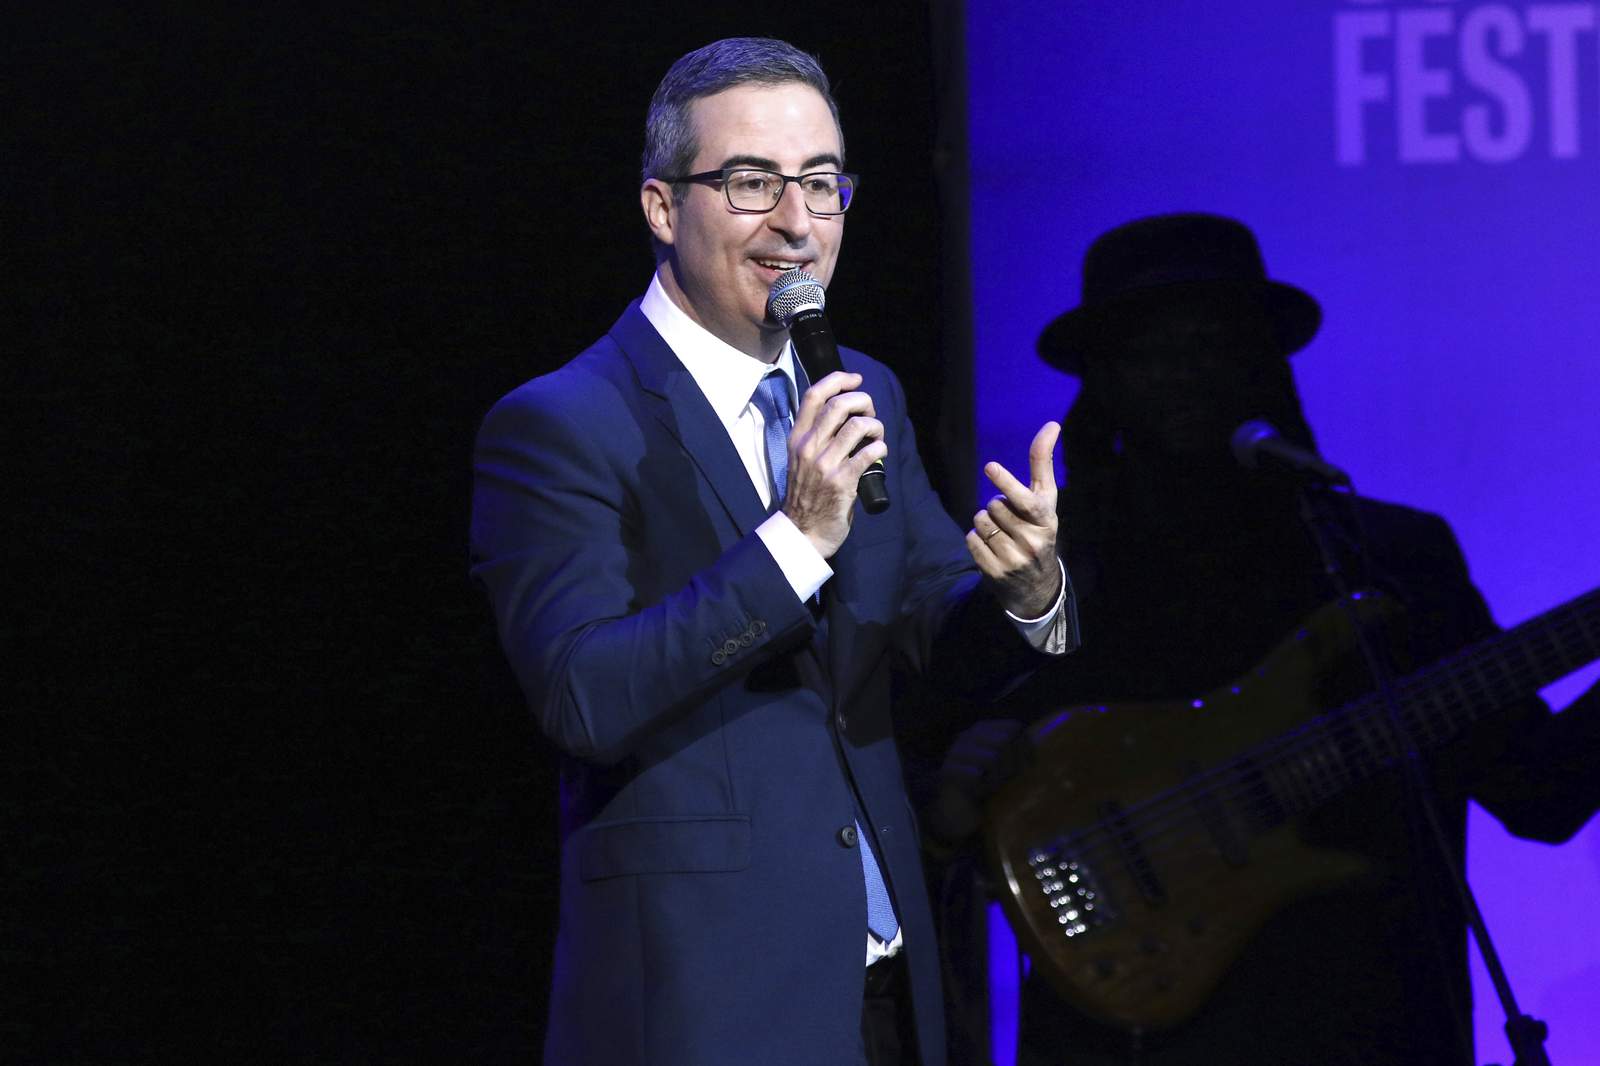 John Oliver: Name sewage plant for me, I'll give to charity